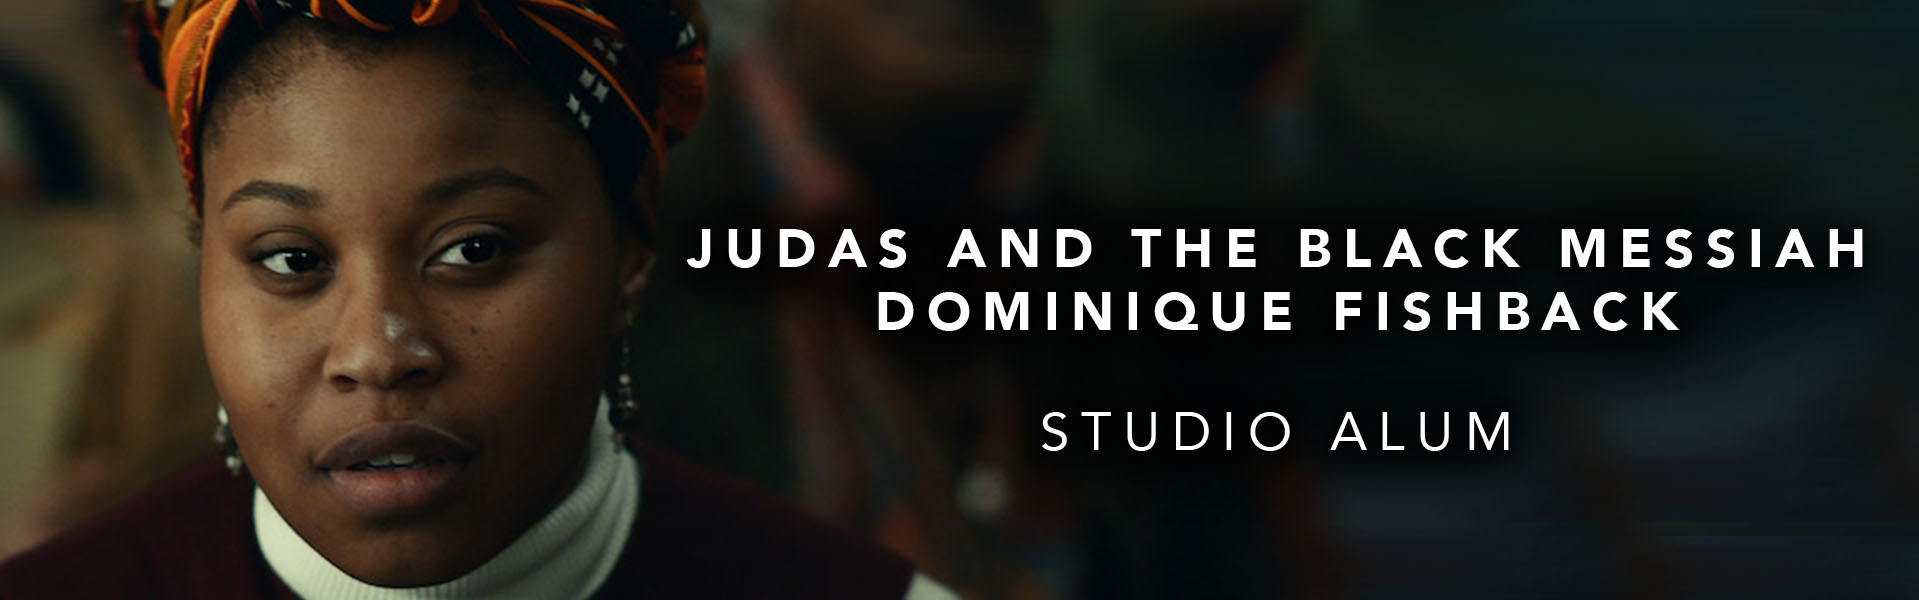 Dominique Fishback in Judas and the Black Messiah